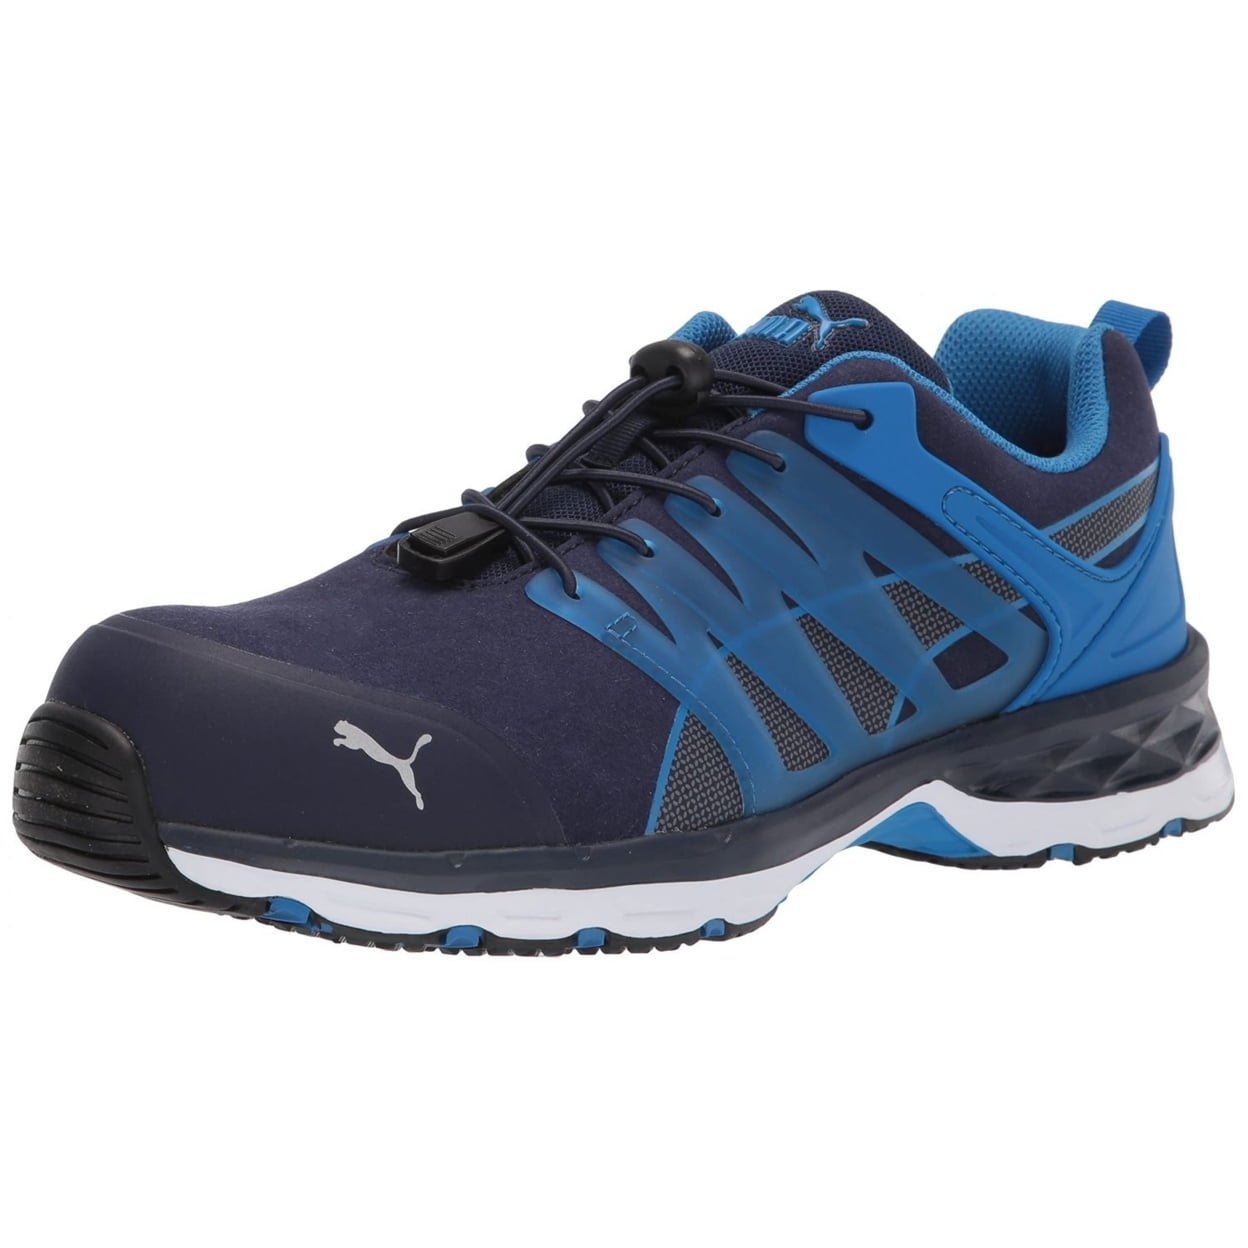 Cap Safety Fiberglass PUMA Safety Metal Men ASTM Resistant Free Slip Safety ONE Blue Toe Velocity 2.0 Low Toe SD Shoes